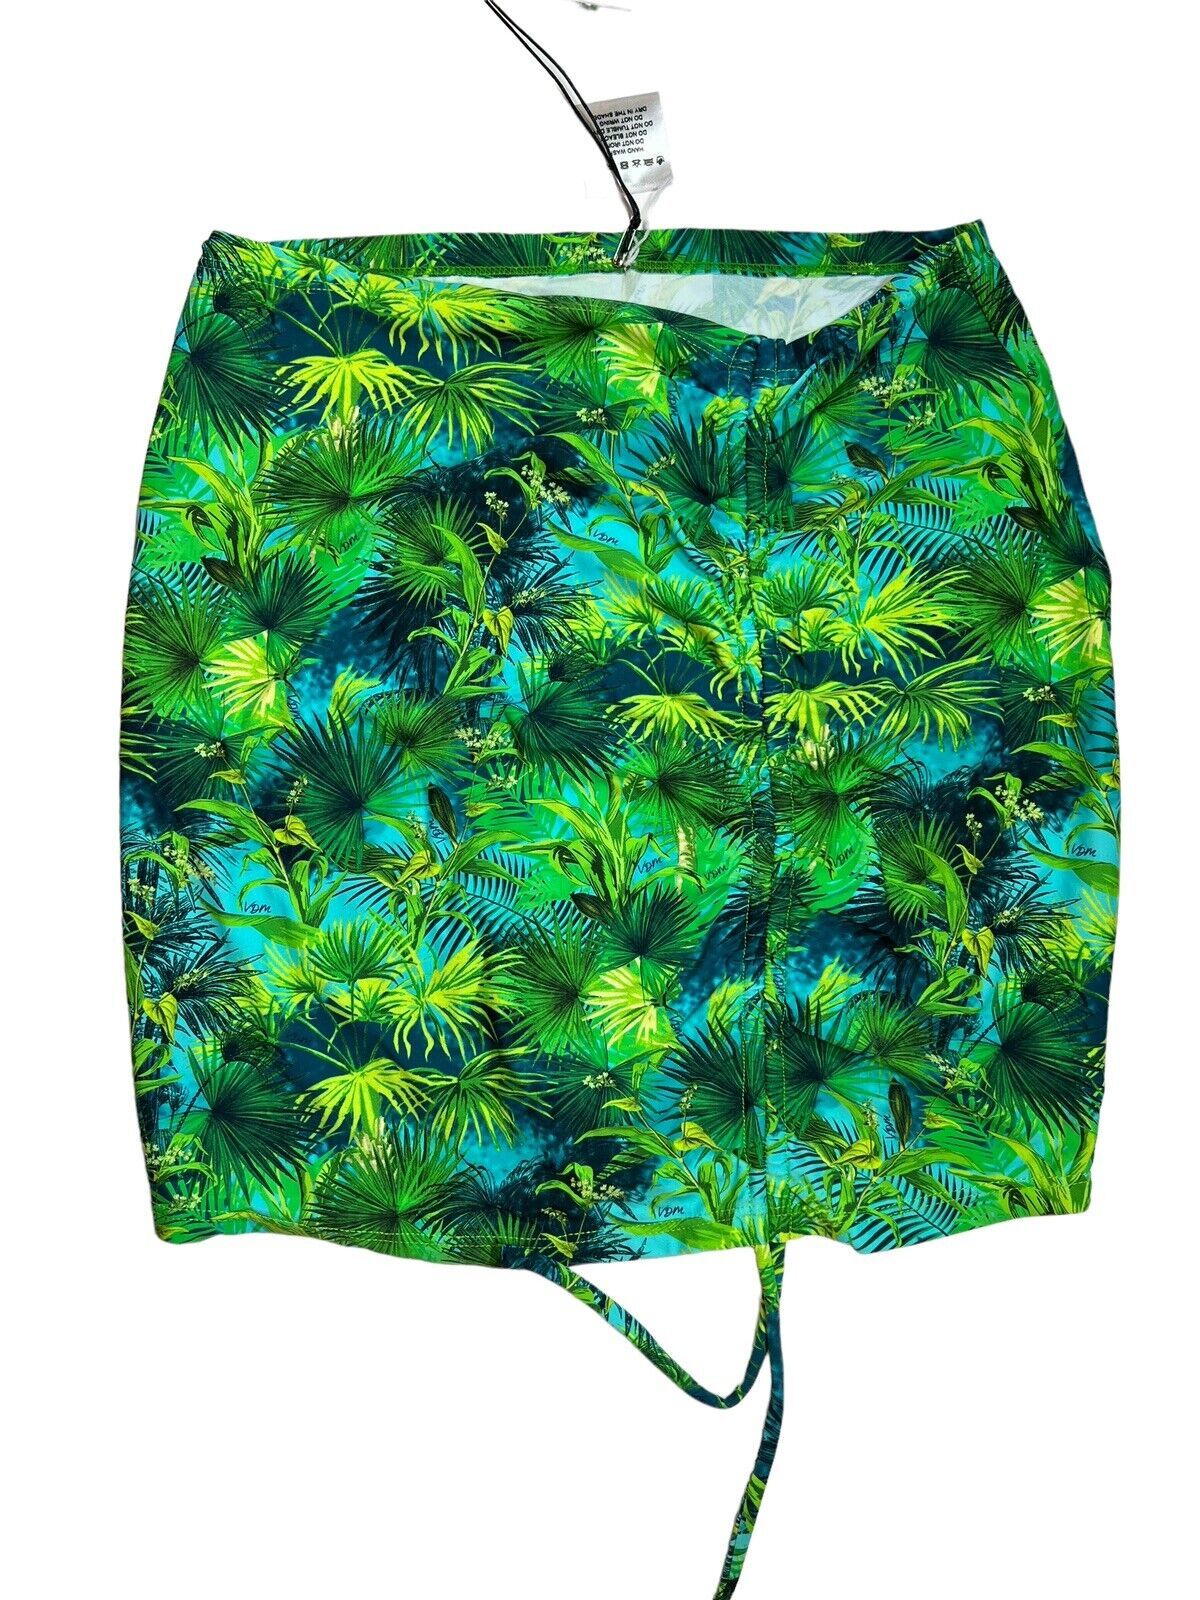 Primary image for VDM The Label Natalie Green Tropical Print Swimsuit Cover Up Skirt XS New